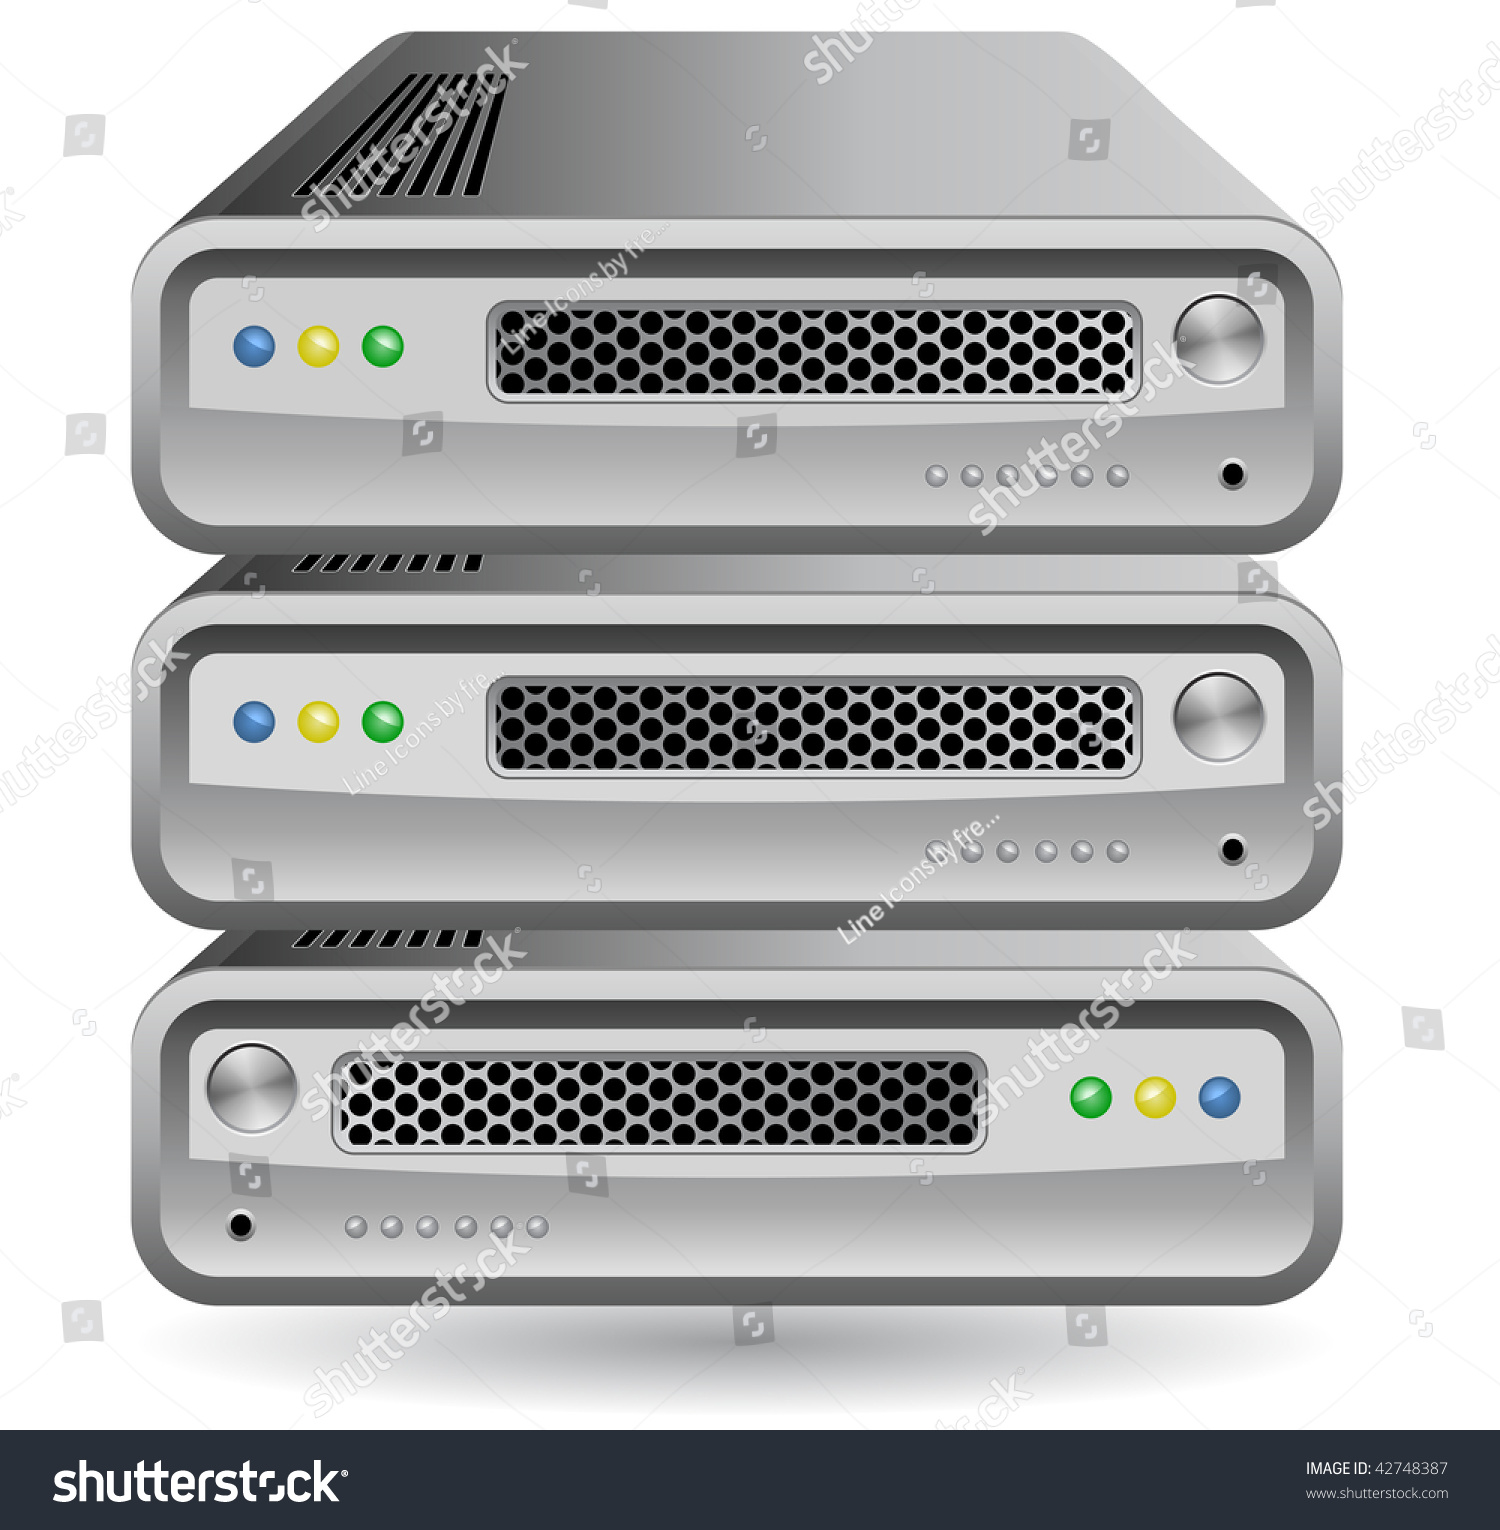 Network router icon stock vector. Illustration of network - 77291330